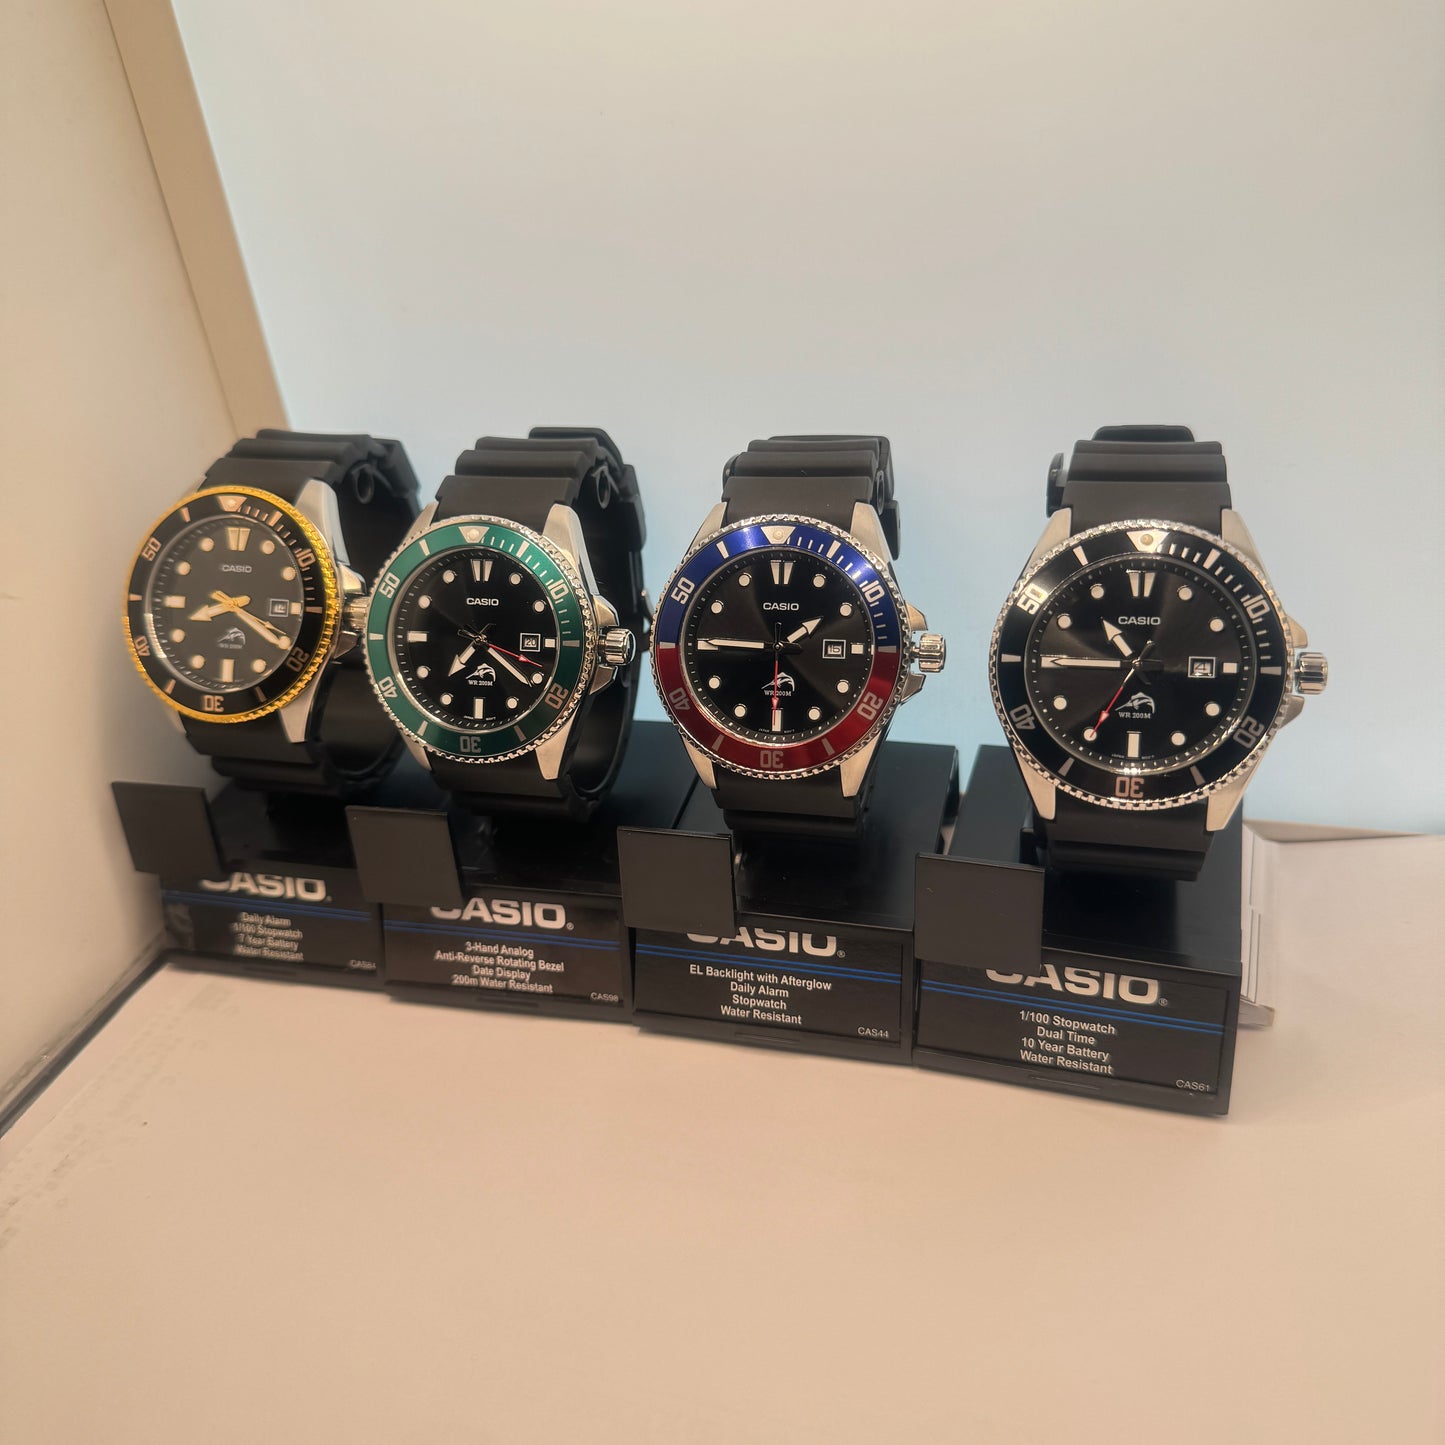 Introducing the Casio Watch for Men, a brand new item that boasts a sleek and stylish design. With a 40mm diameter, this watch is the perfect size for any man's wrist. The rubber band ensures maximum comfort, and it can fit wrists up to 9 inches long.

Wh